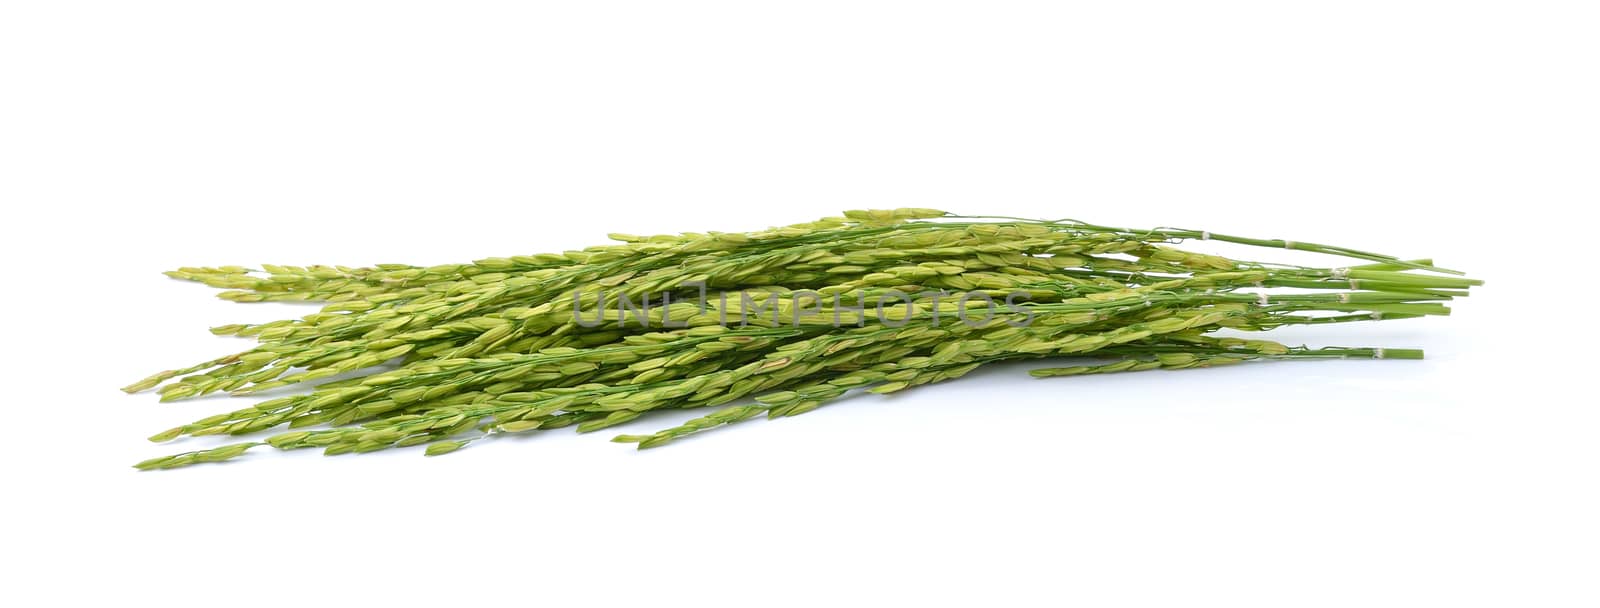 Rice isolated on a white background